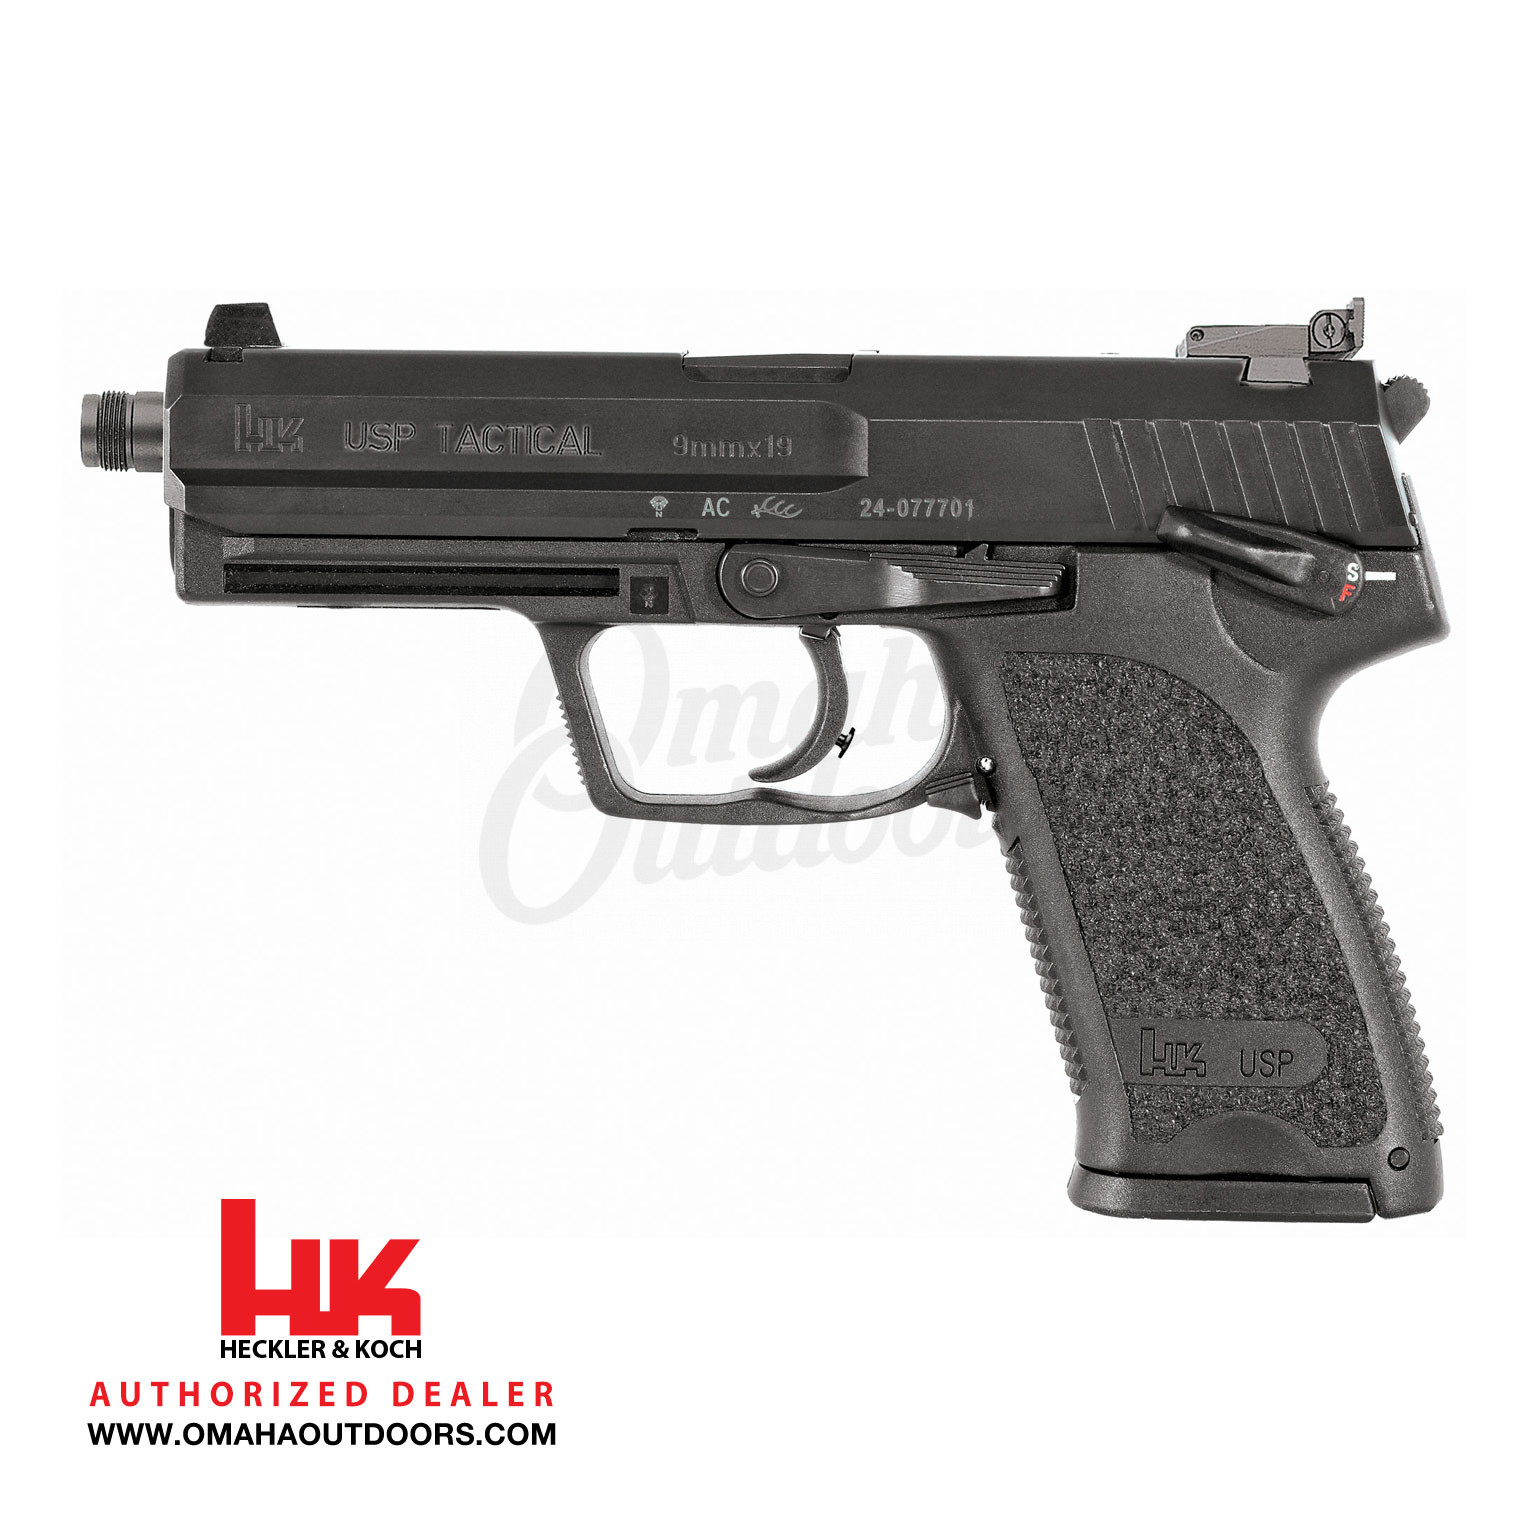 HK USP Compact 9mm with Rugged Obsidian 9 Short Configuration : r/NFA